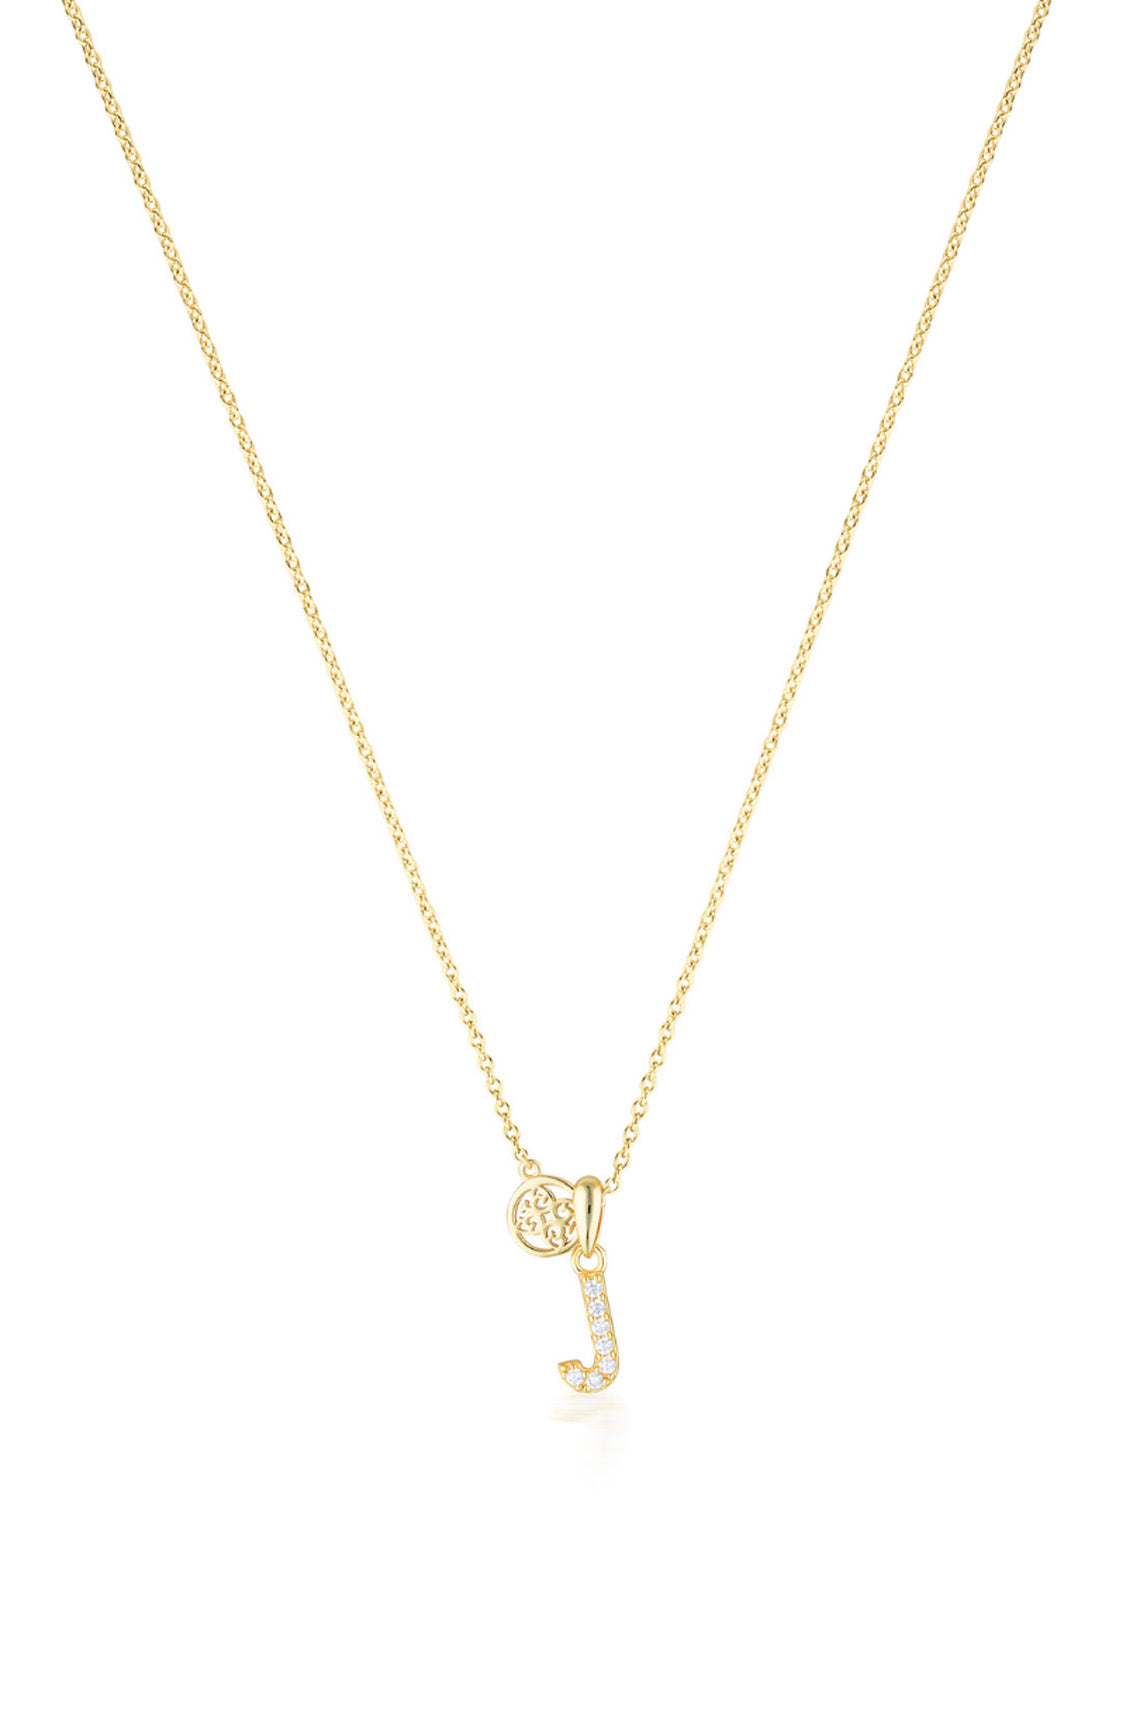 LUXURY LETTERS J INITIAL PENDANT GOLD